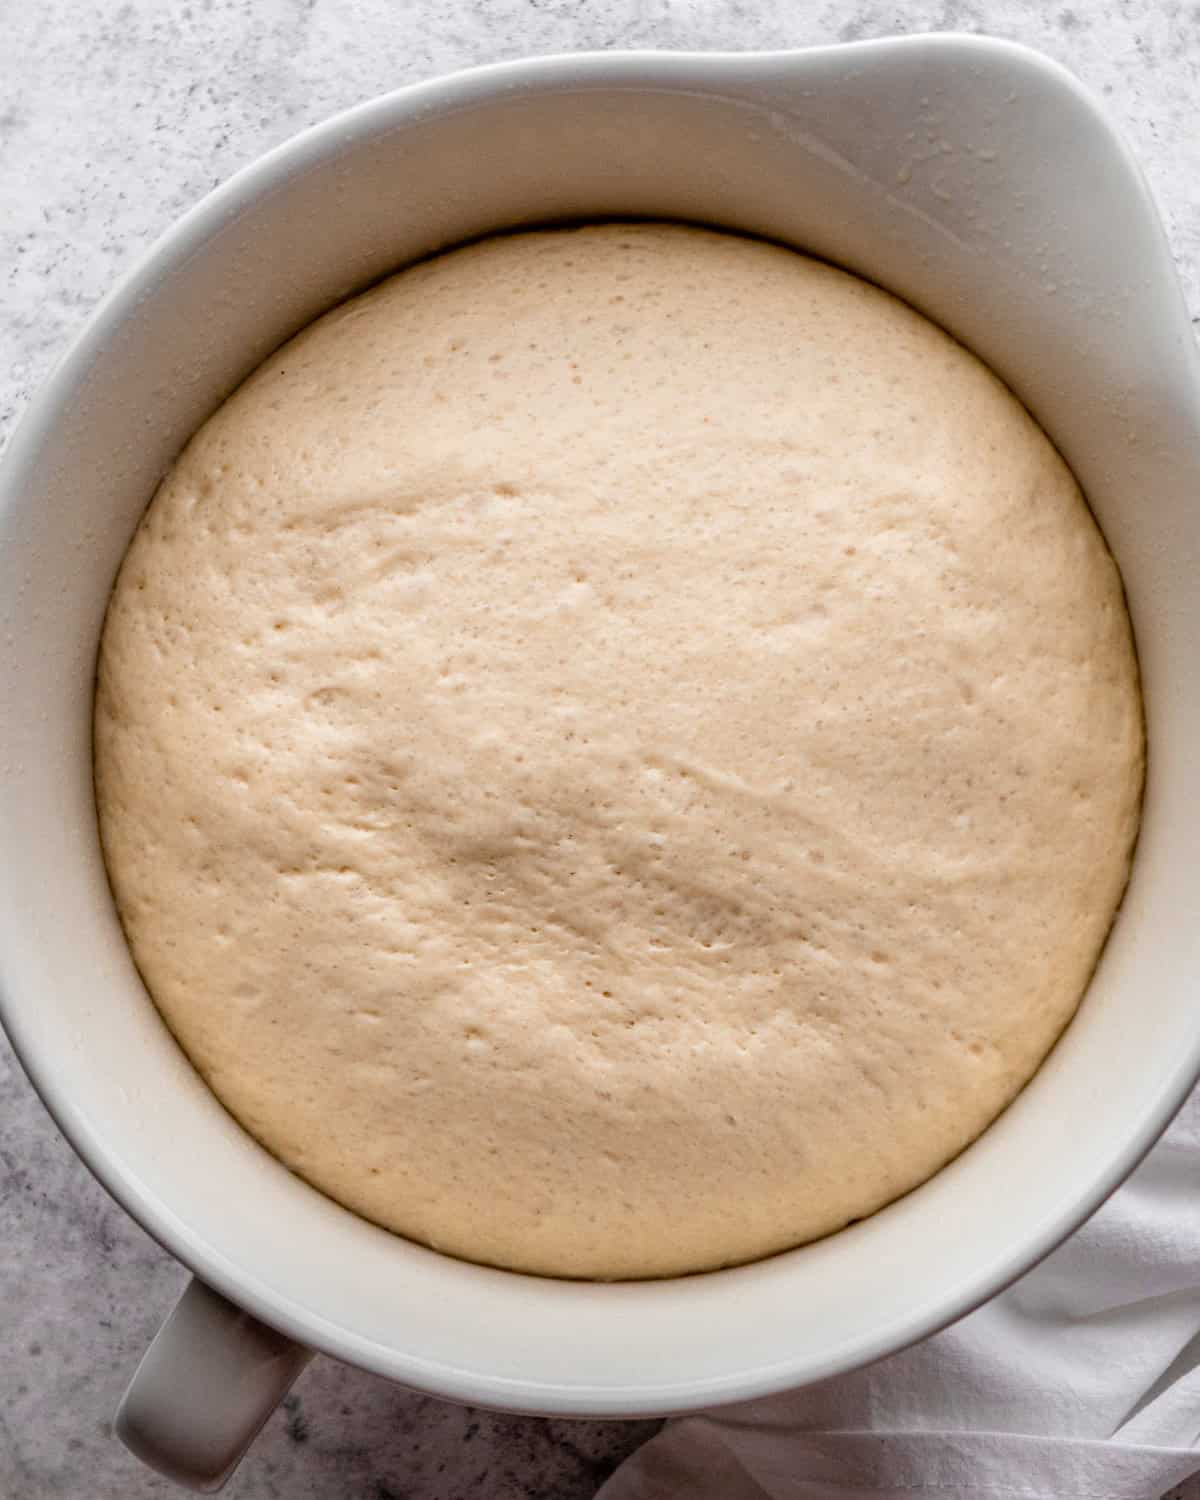 How to Make Pretzel Bread - dough in a bowl after rising